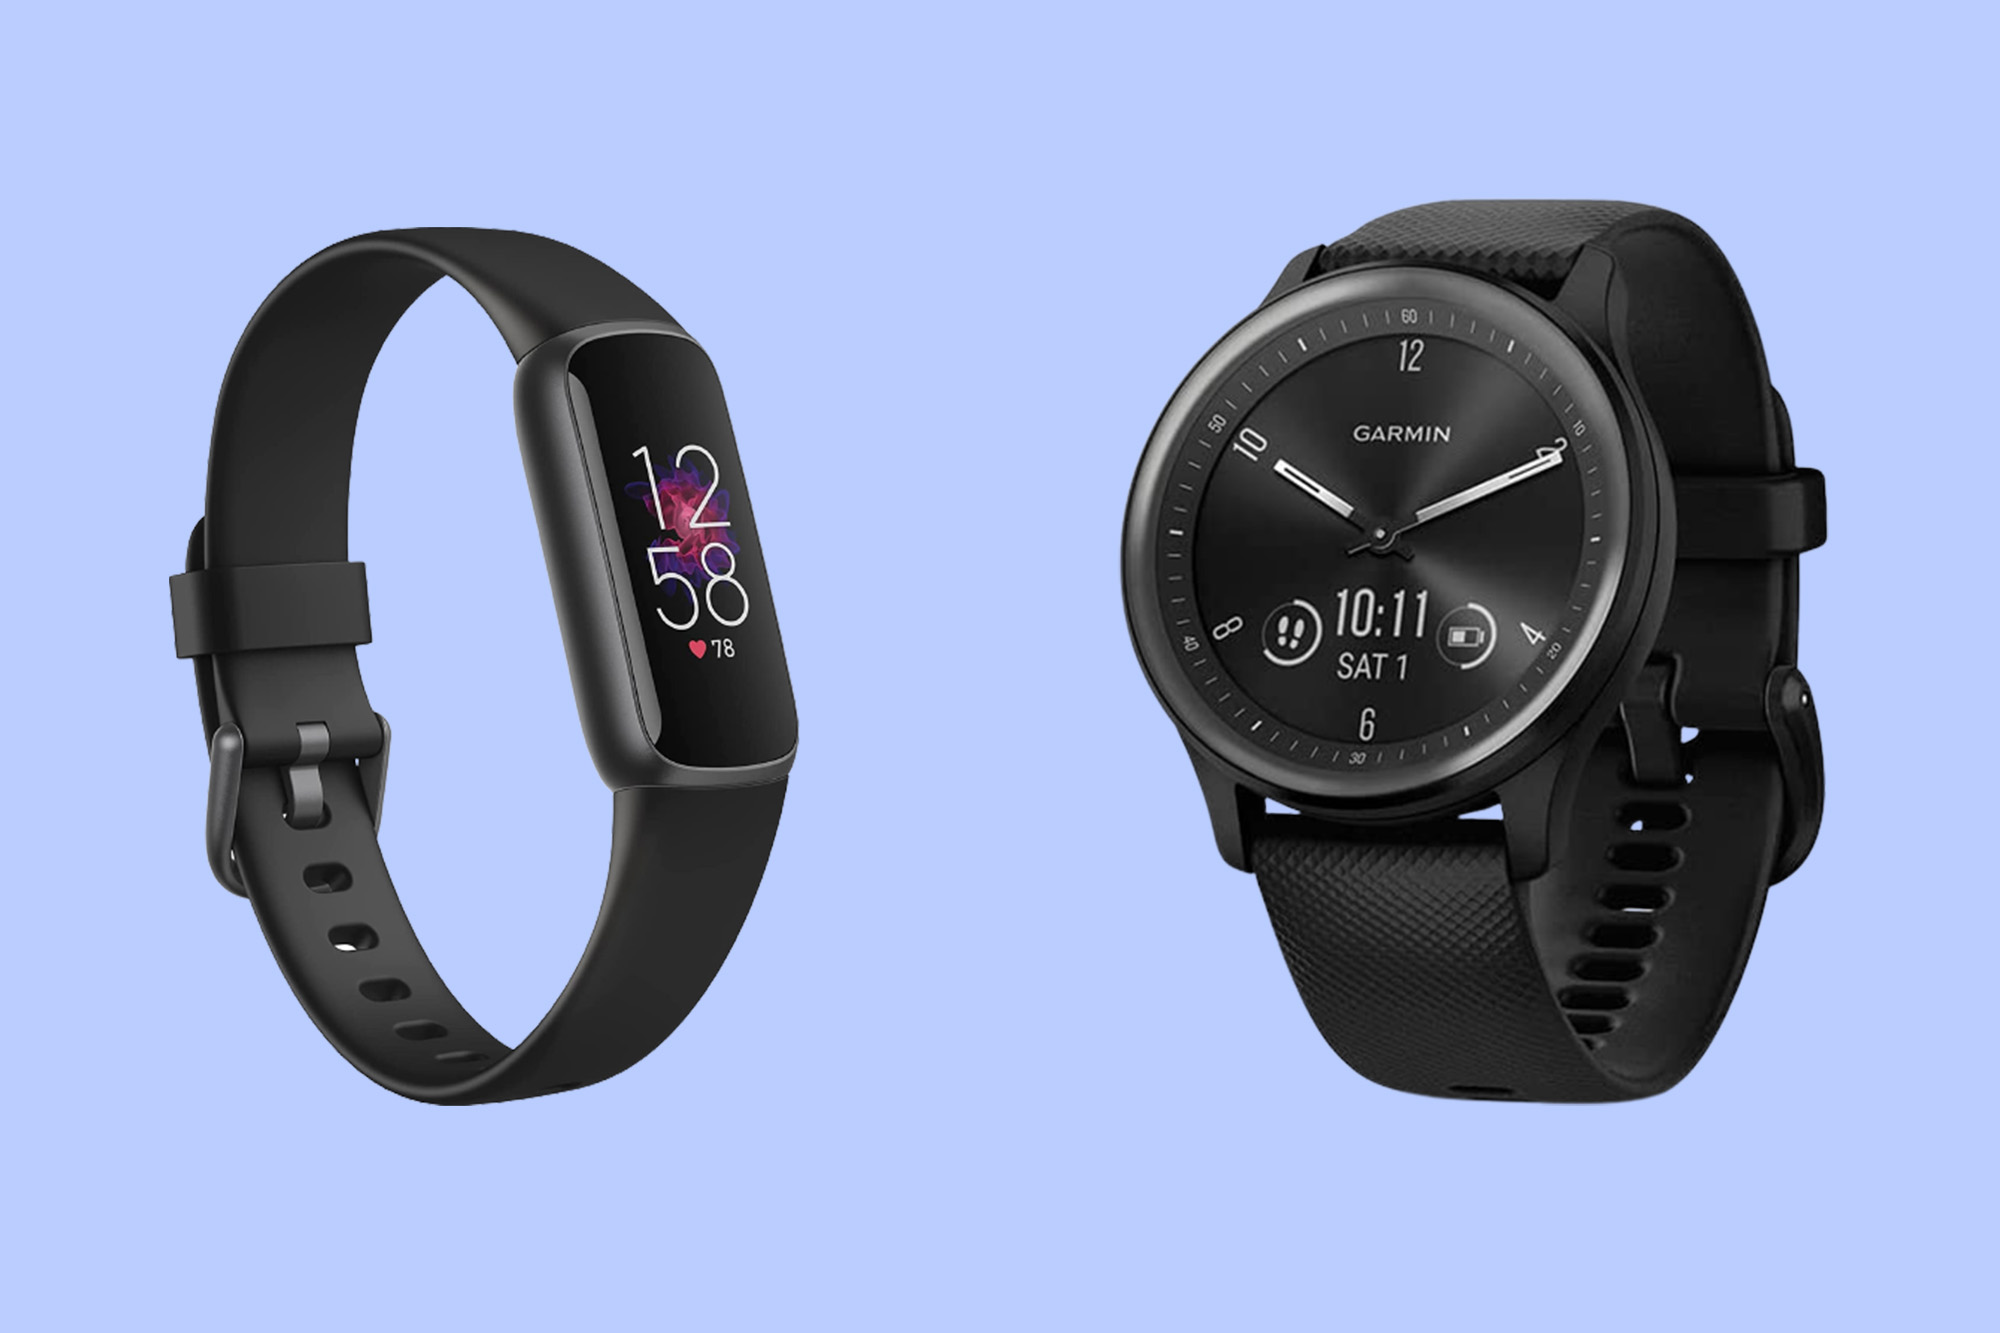 Take time to get more steps in with discounted Fitbits on Amazon